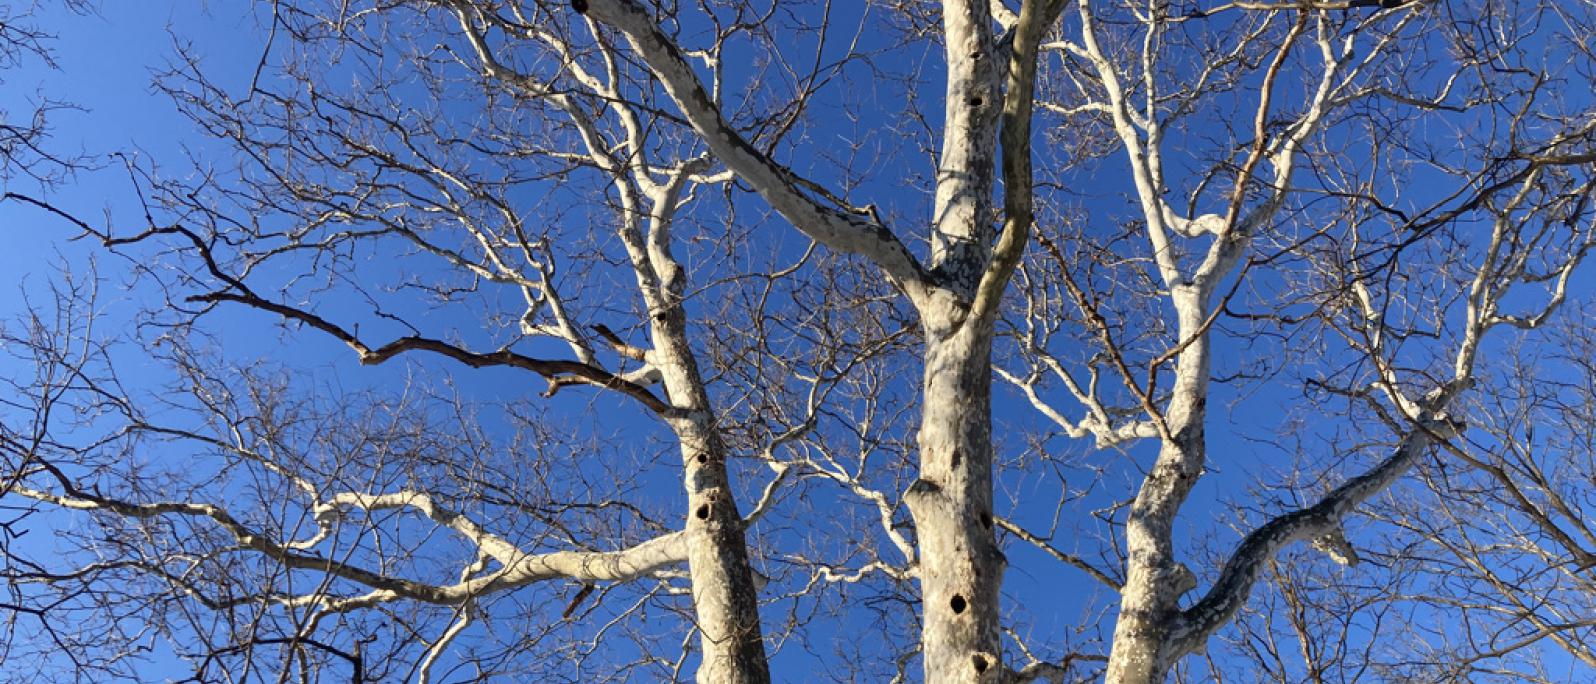 Sunlight brightens the white limbs of a sycamore in the bright blue sky